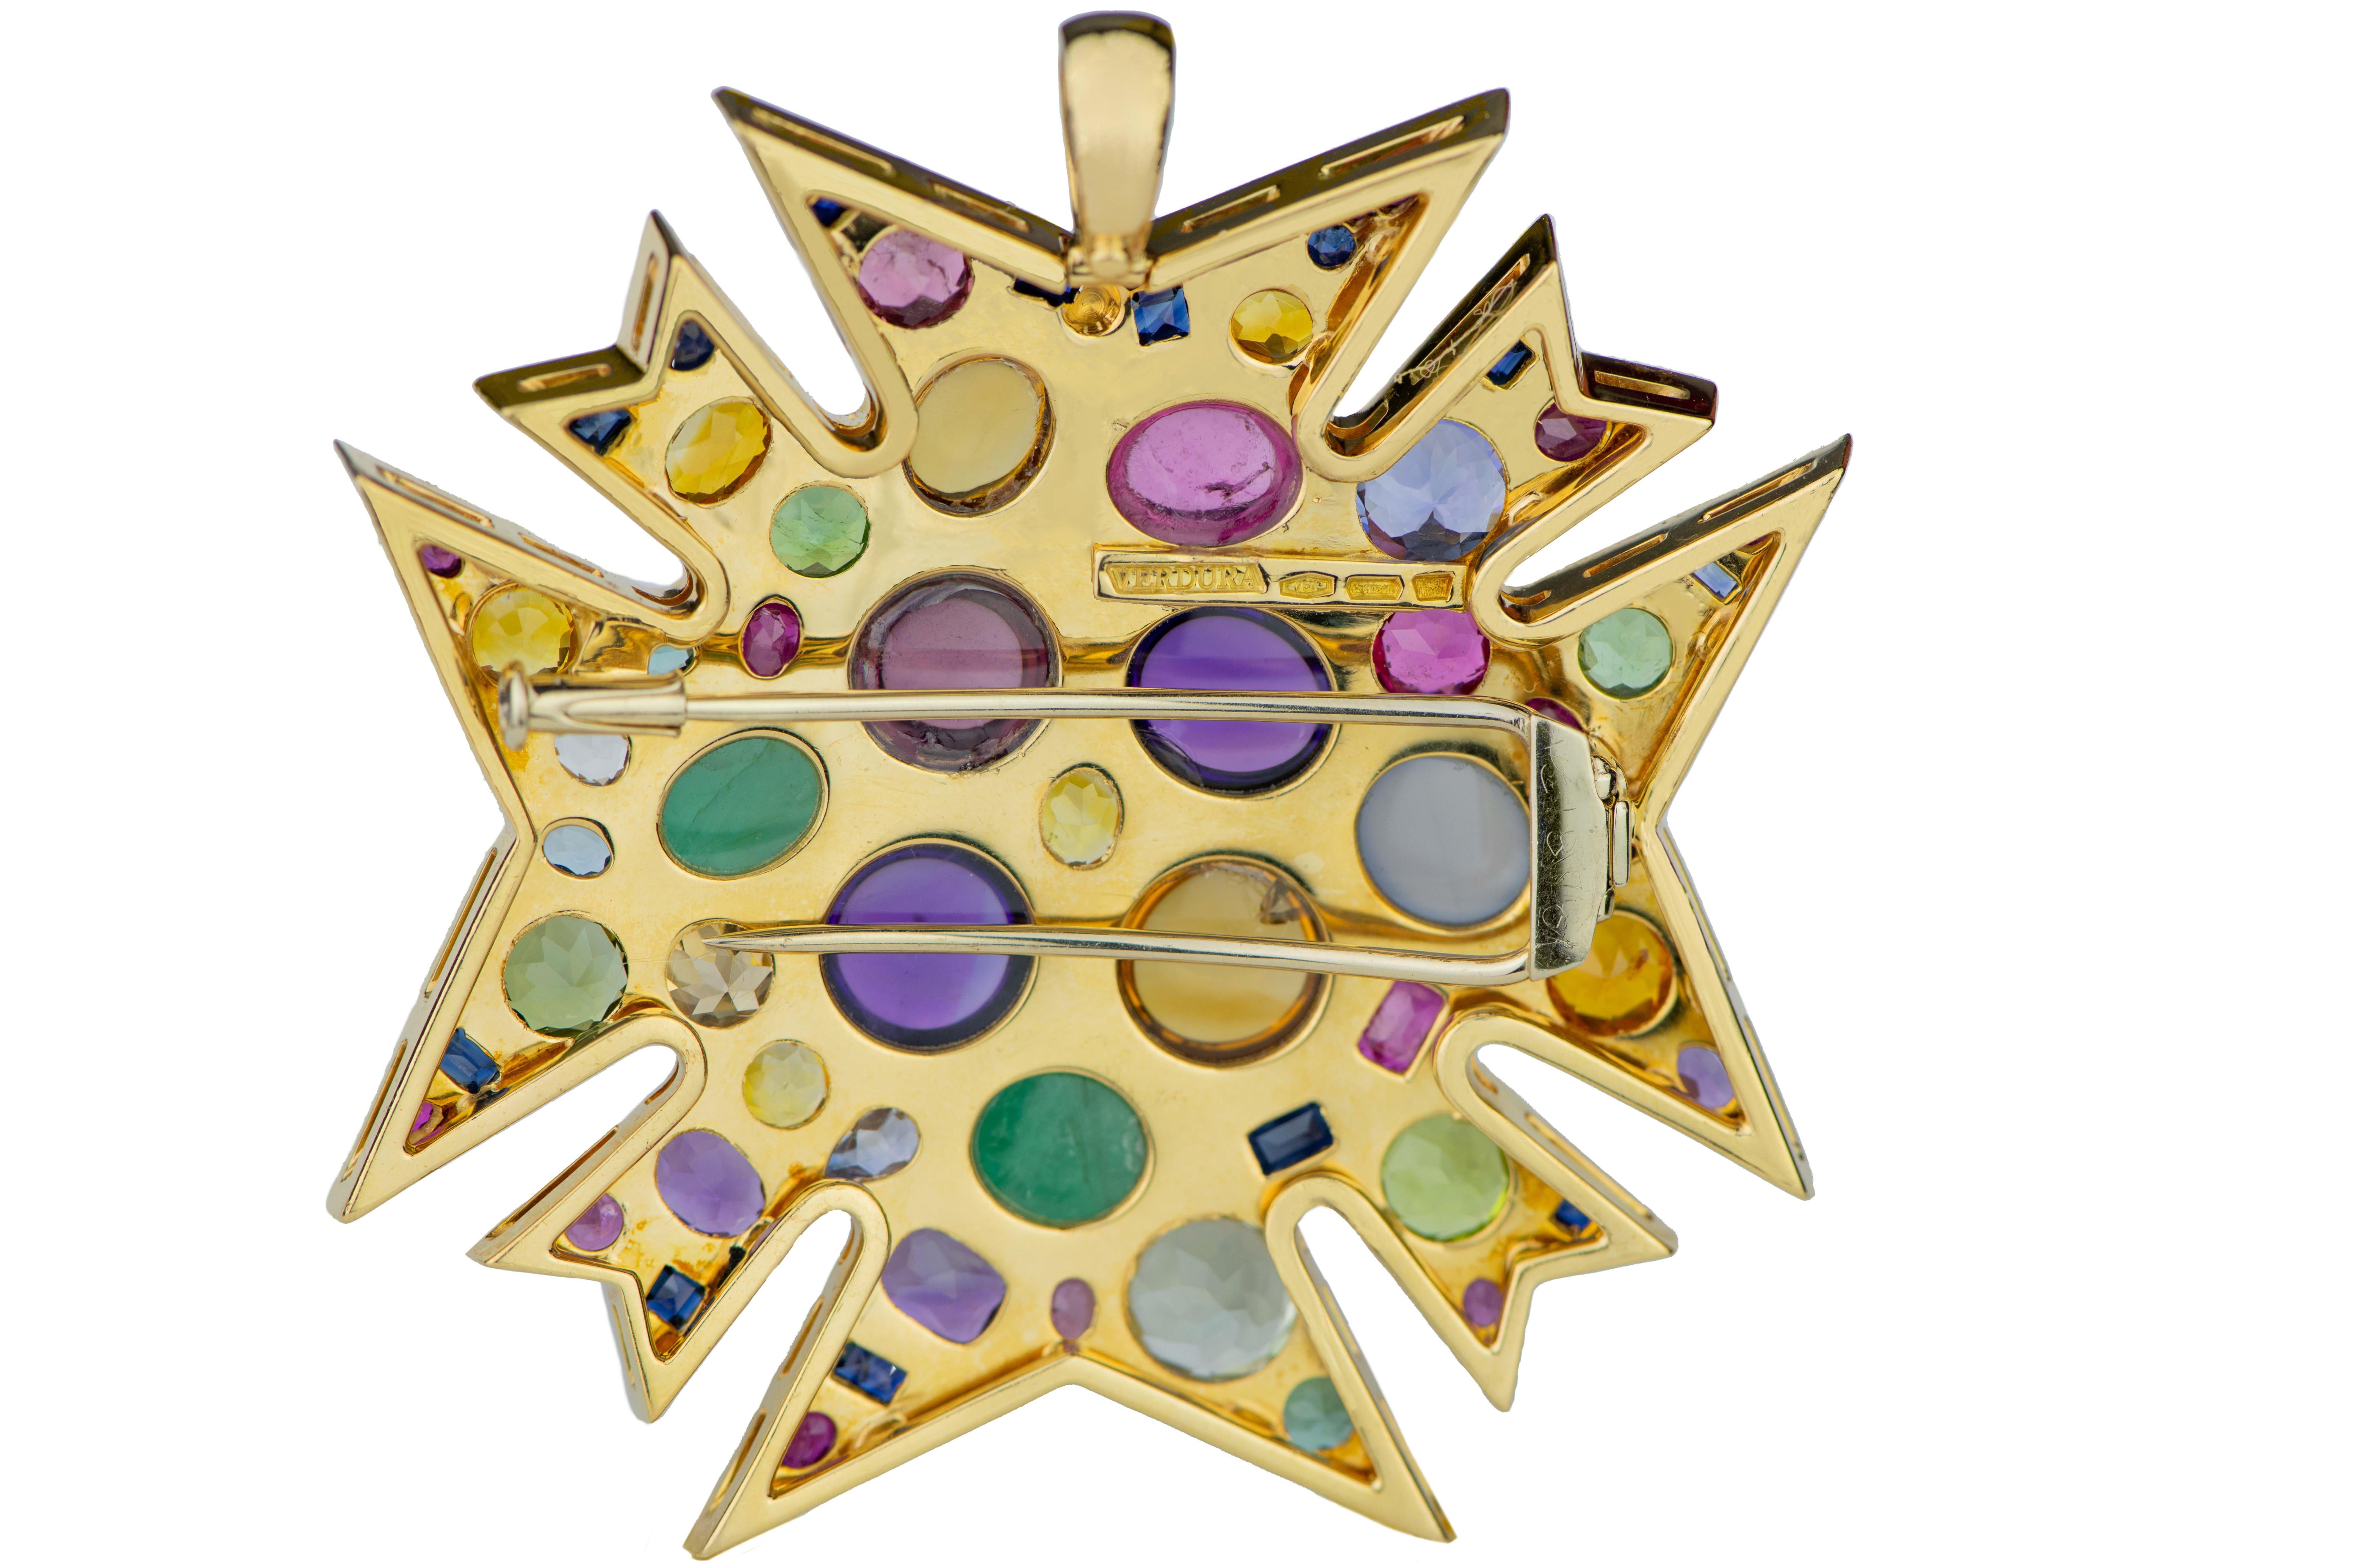 This magnificent piece was inspired by the pair of brooches owned by Diana Vreeland. 